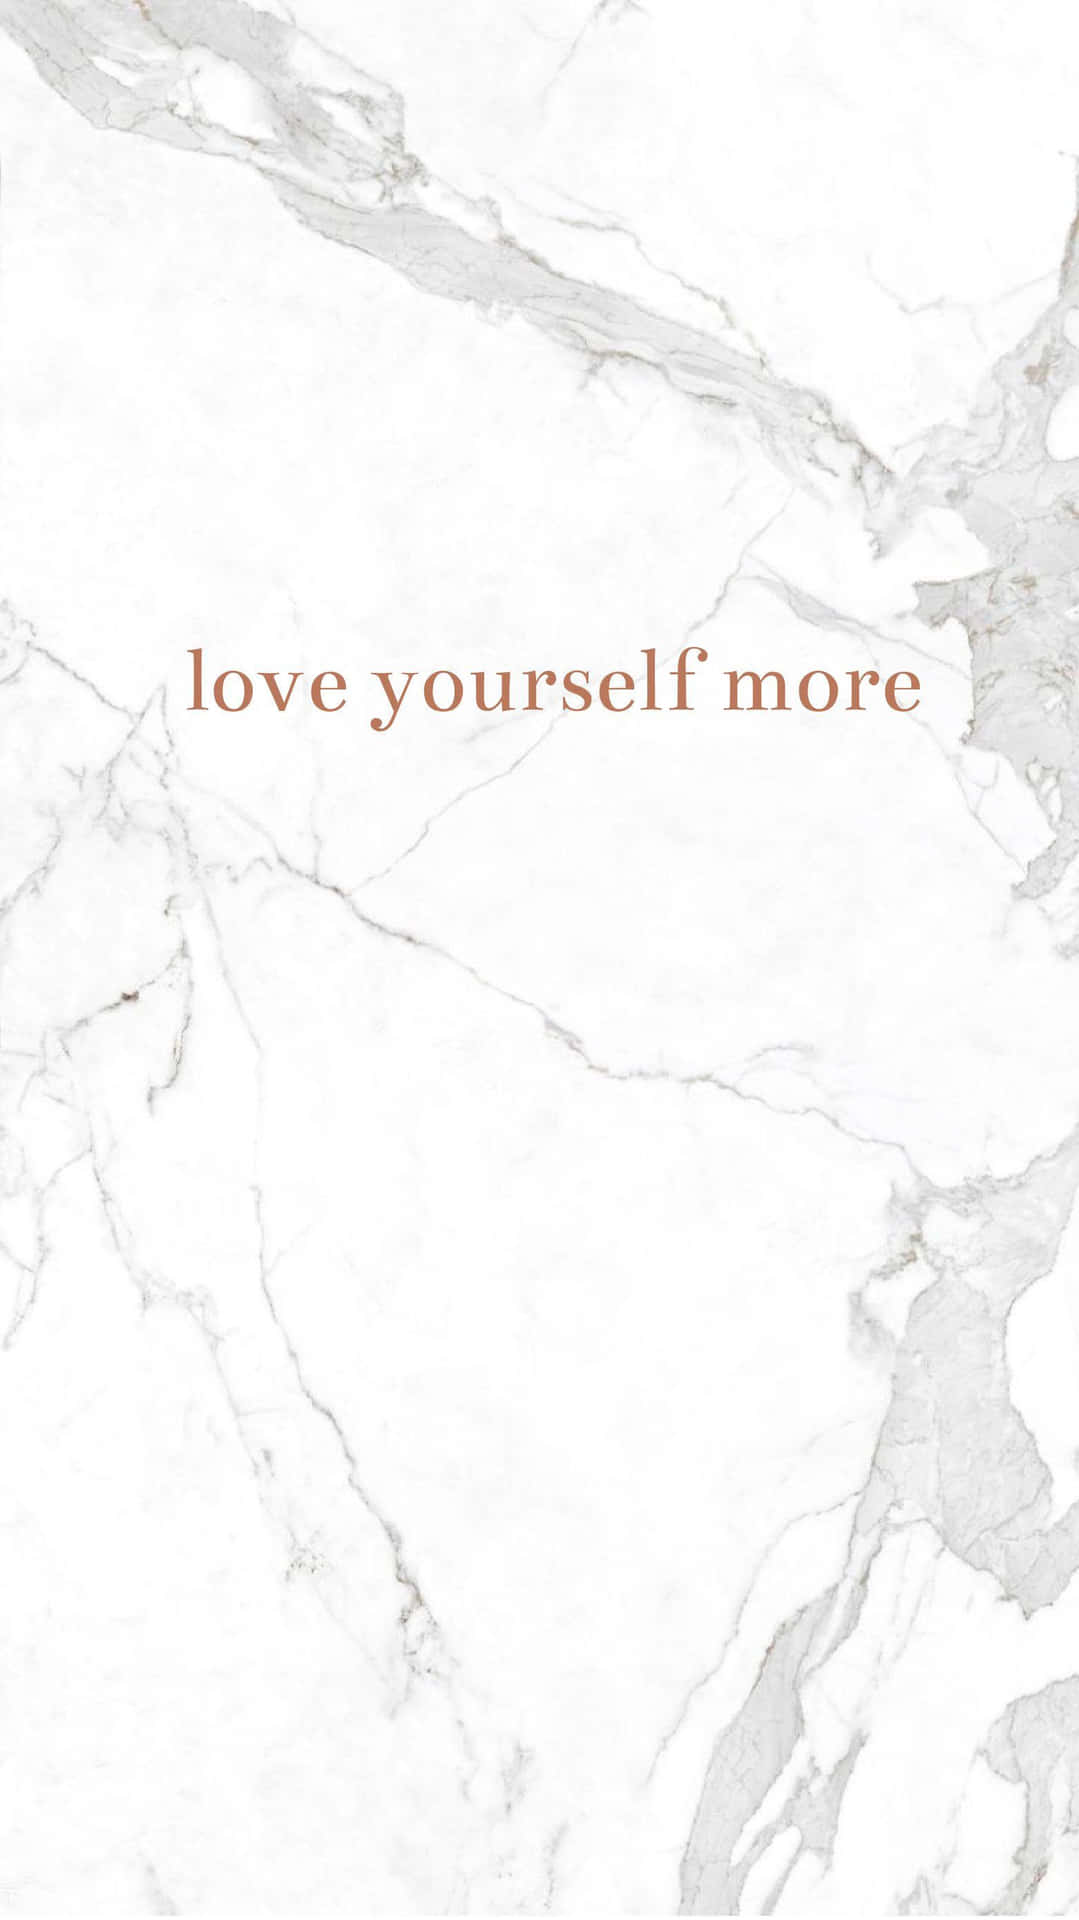 Take time to love yourself Wallpaper